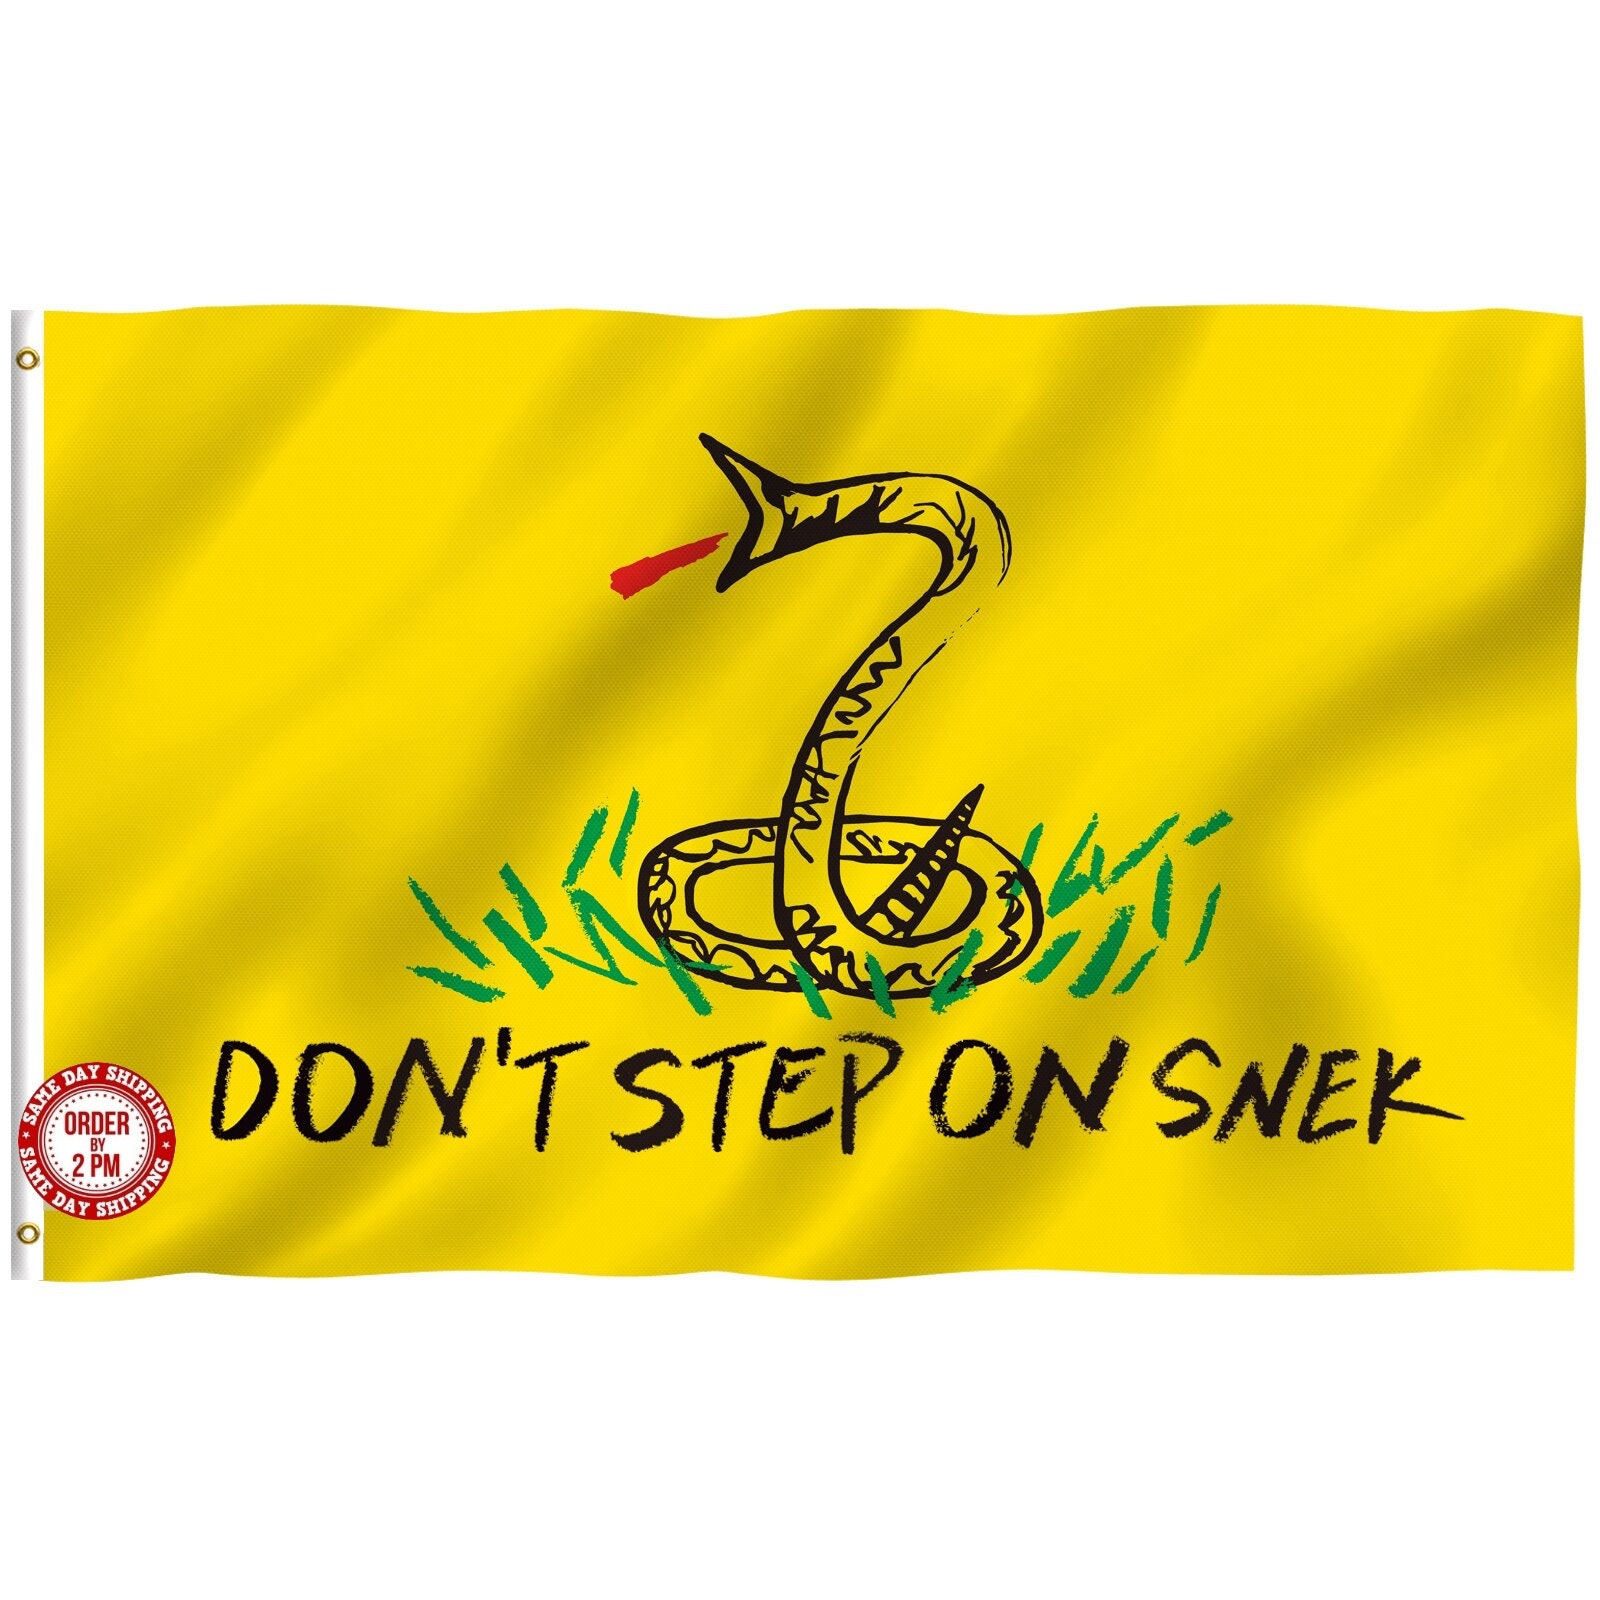 NO STEP ON SNEK – I Heart This